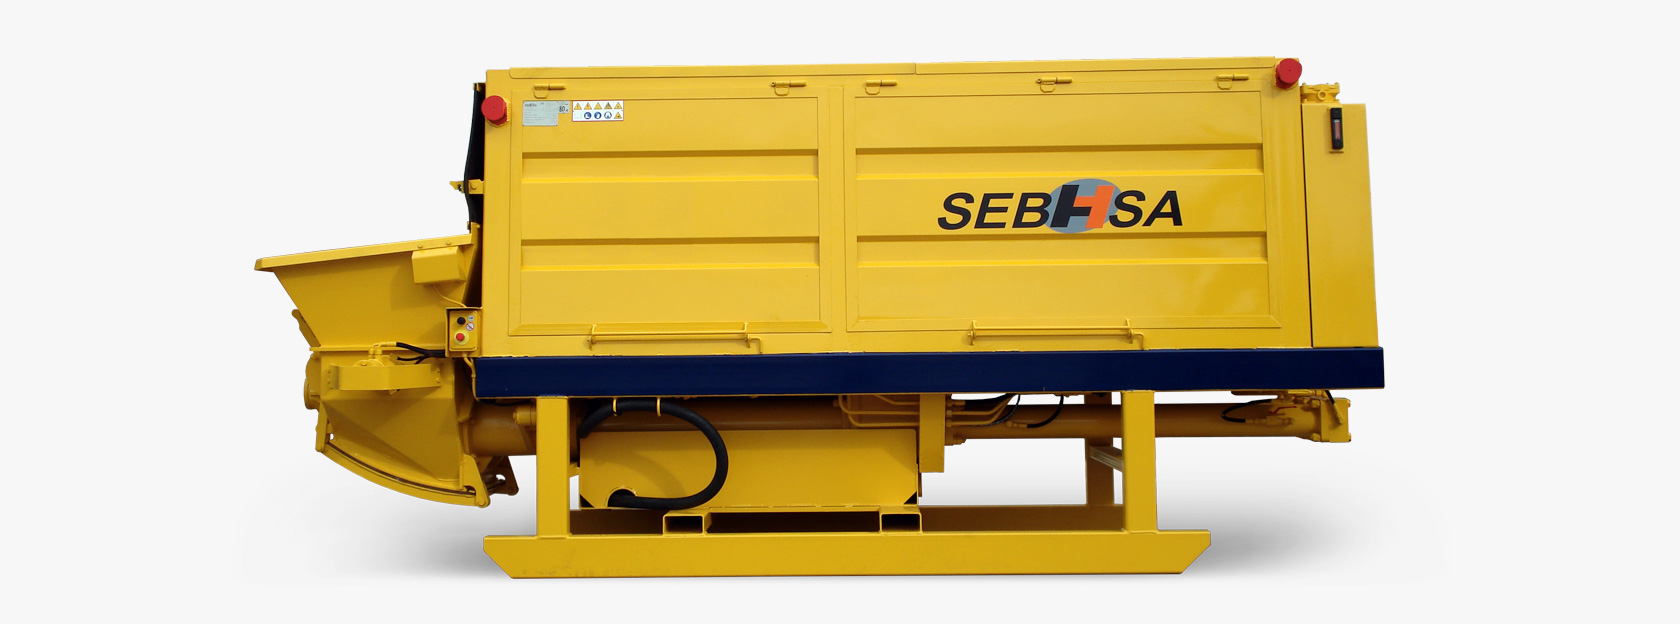 Sebhsa offers high-quality mortar pumping solutions for ground improvement with its mortar range of pumps.